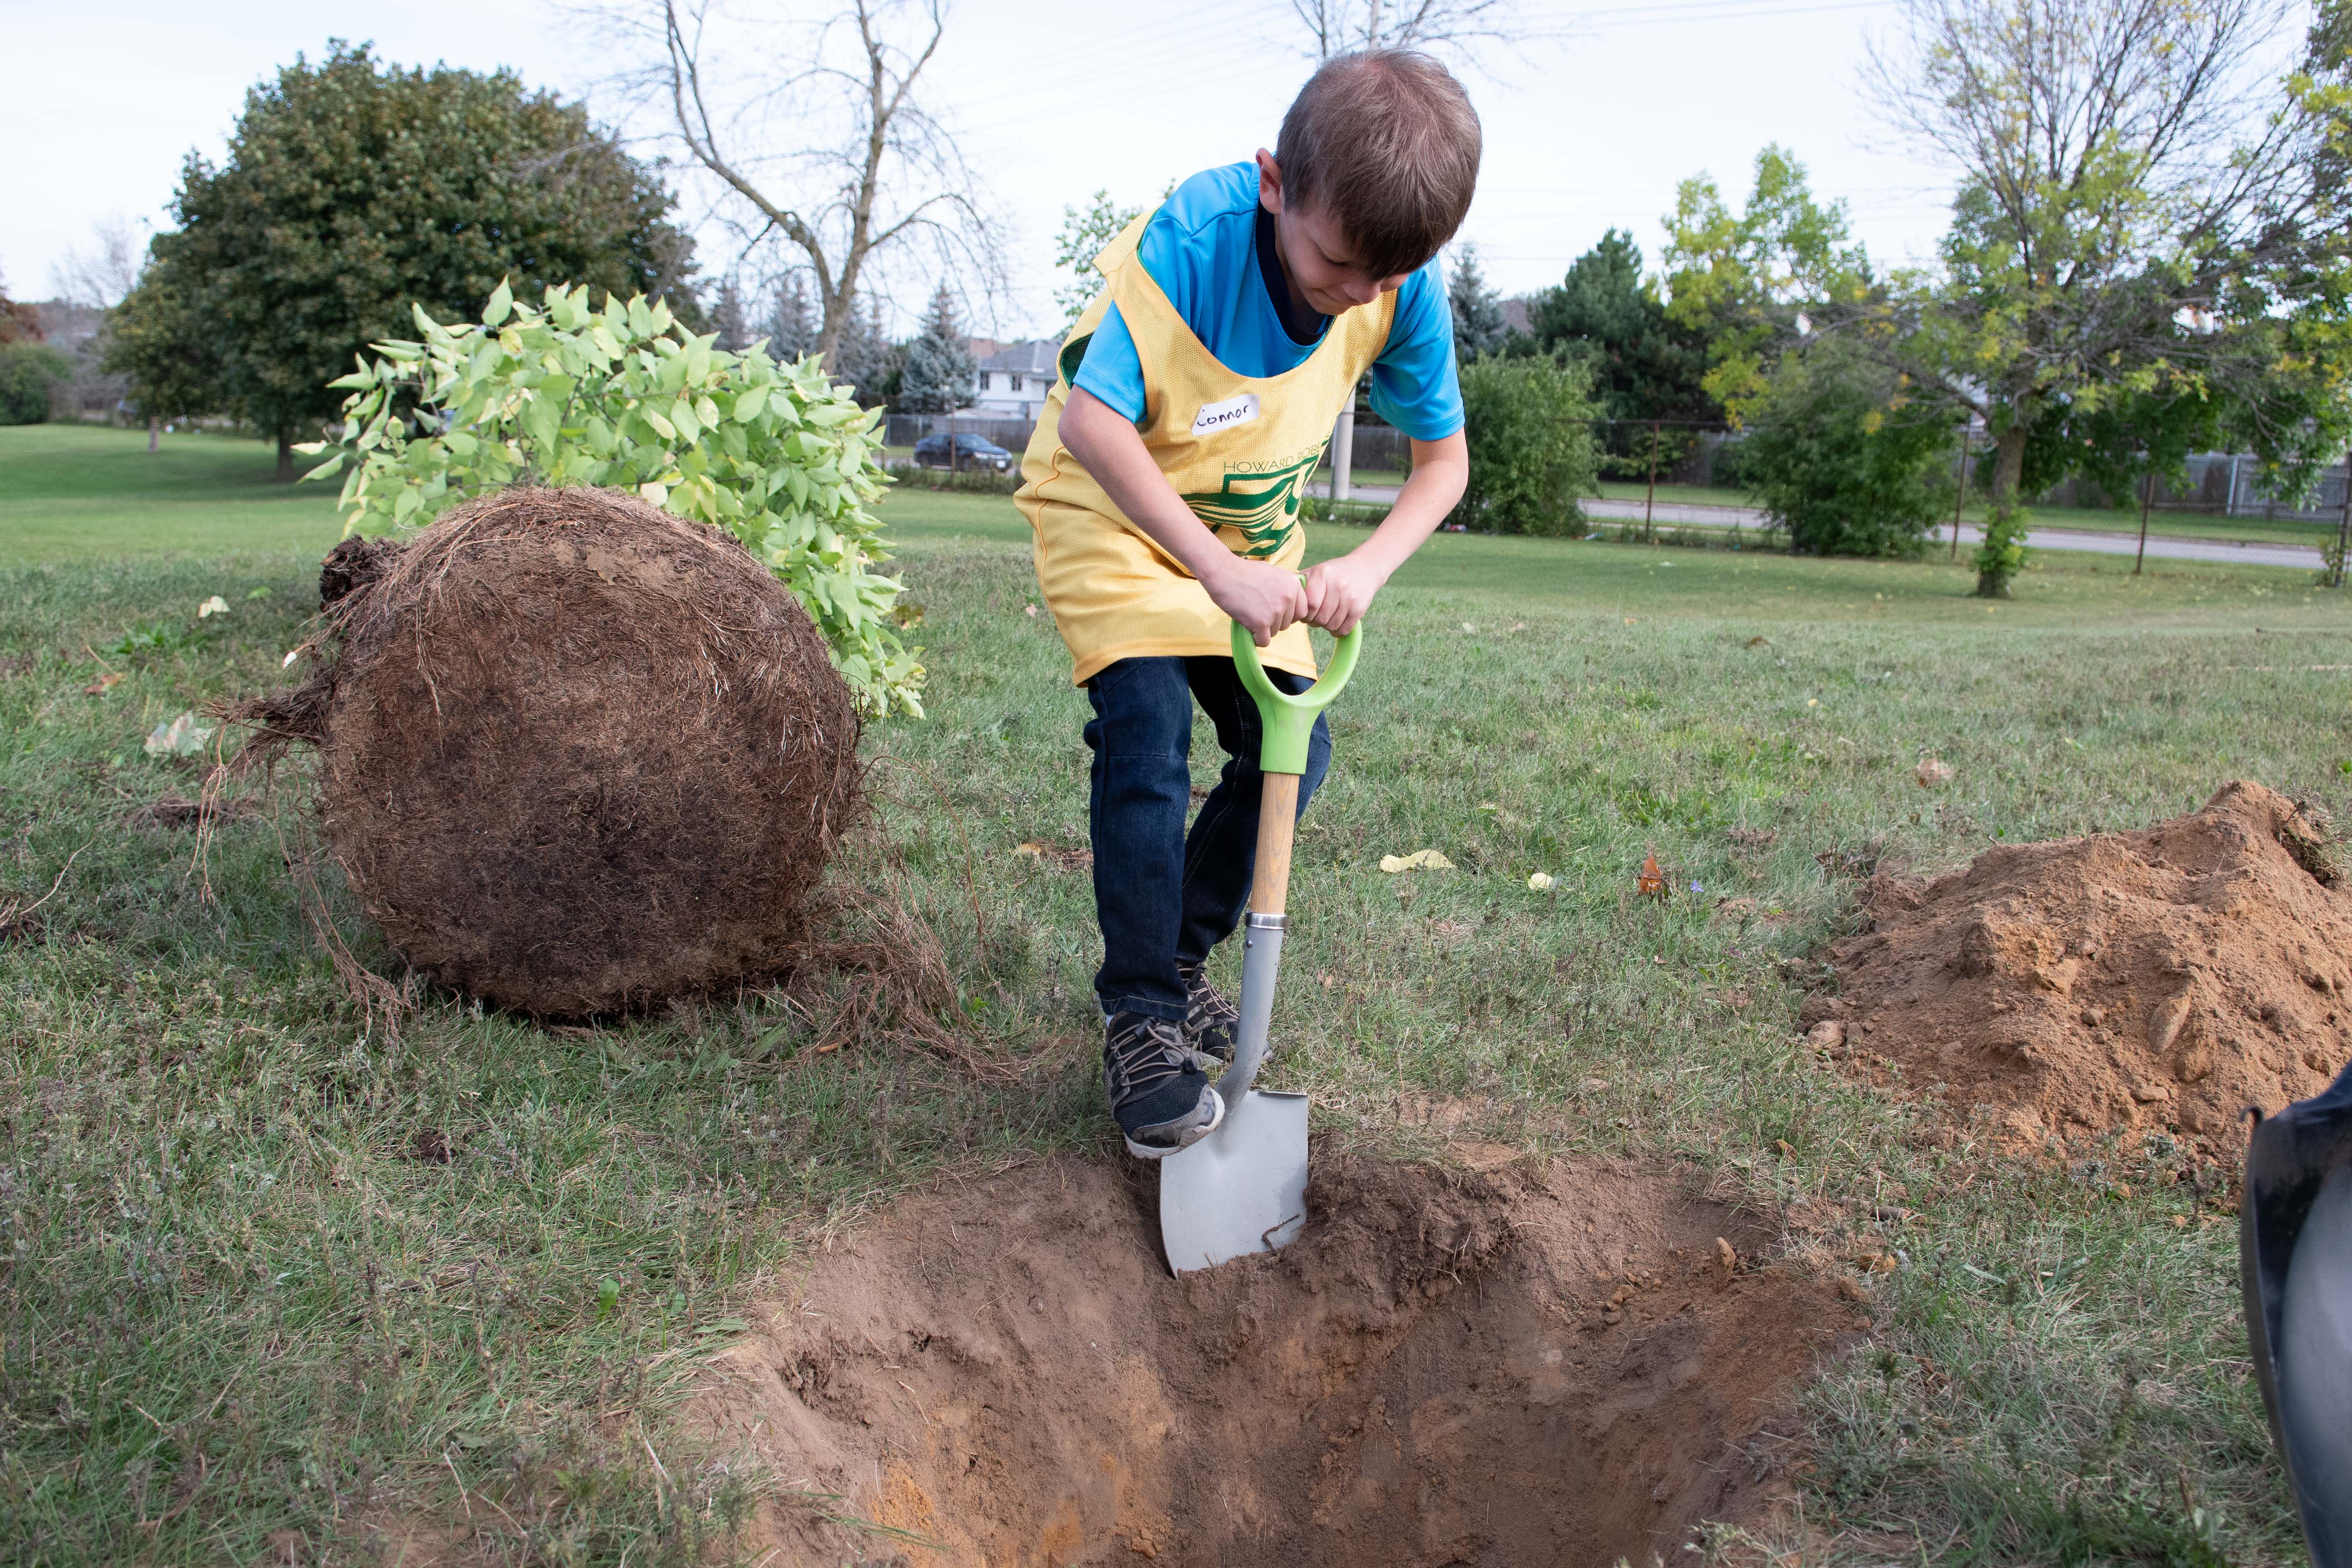 Student digs a hole to plant a tree.